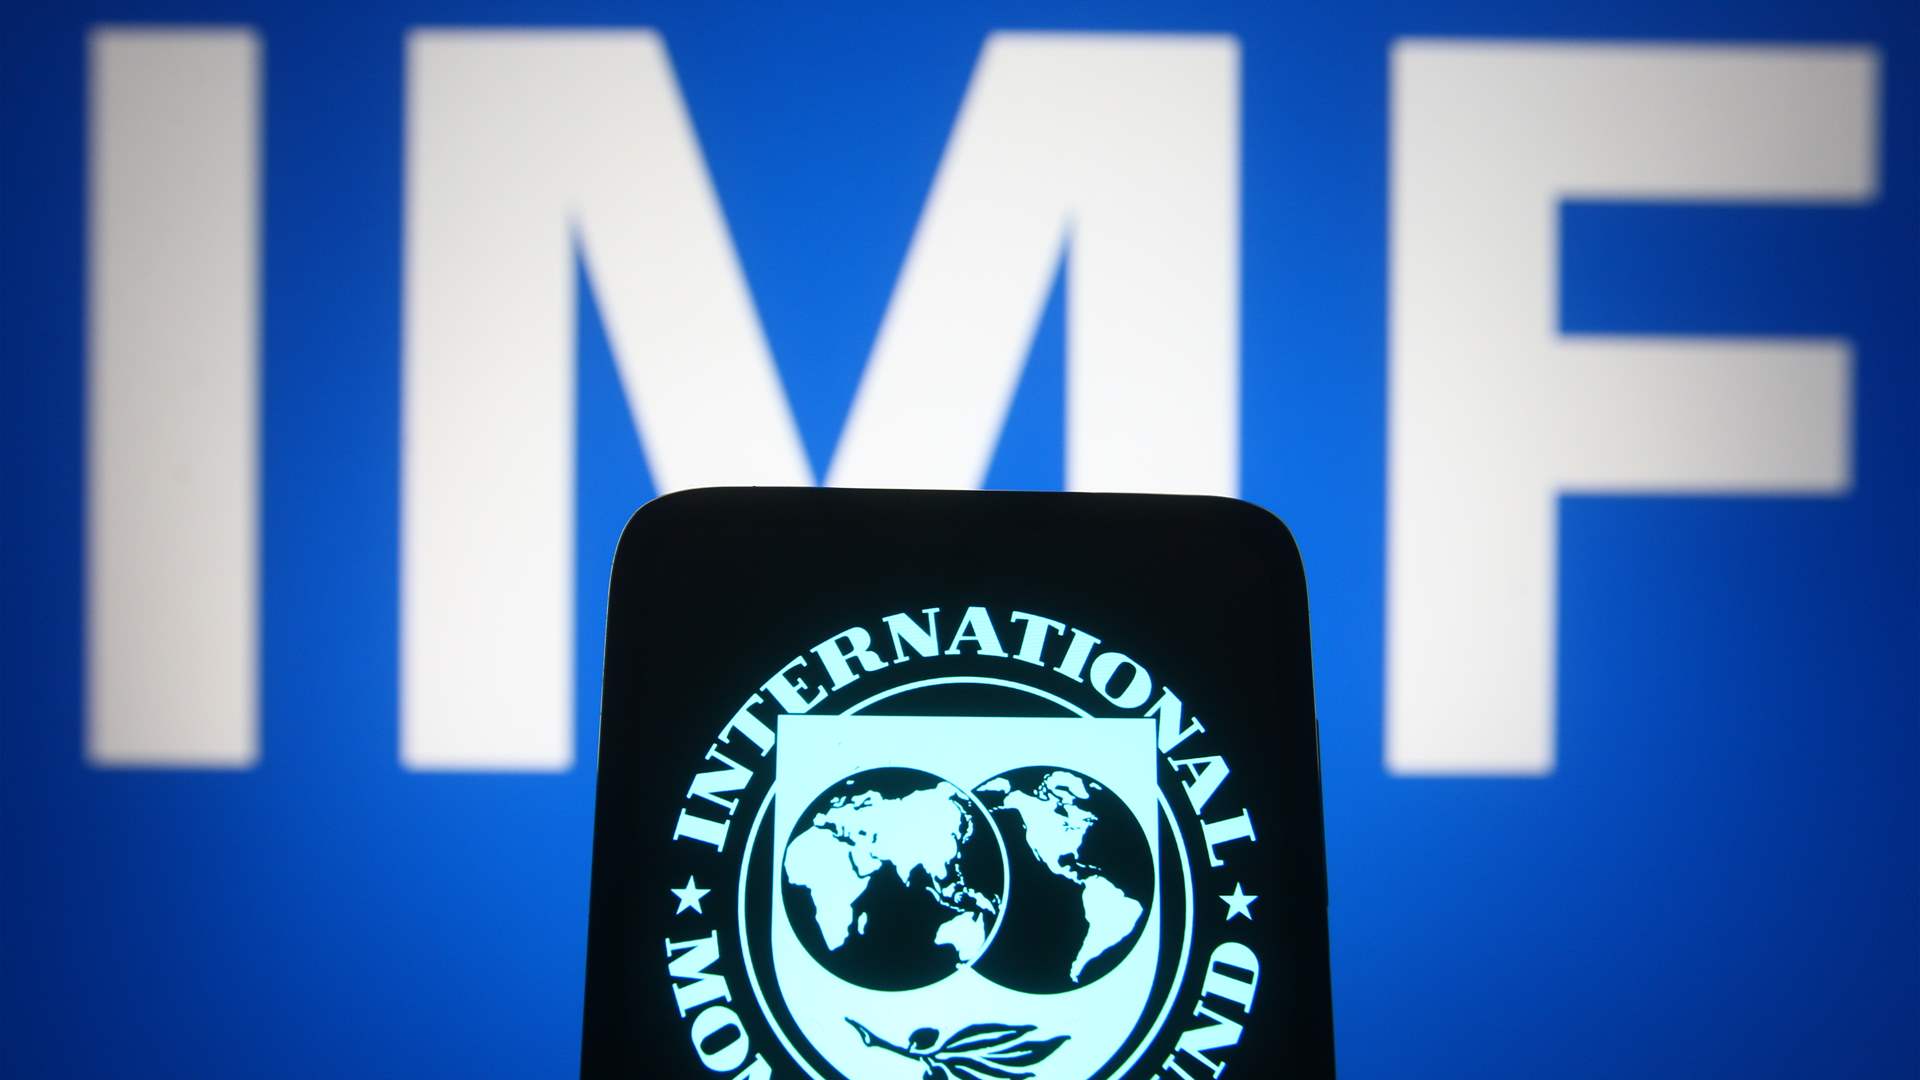 IMF report serves as a clear accusation against Lebanon&#39;s authorities, says banking source 